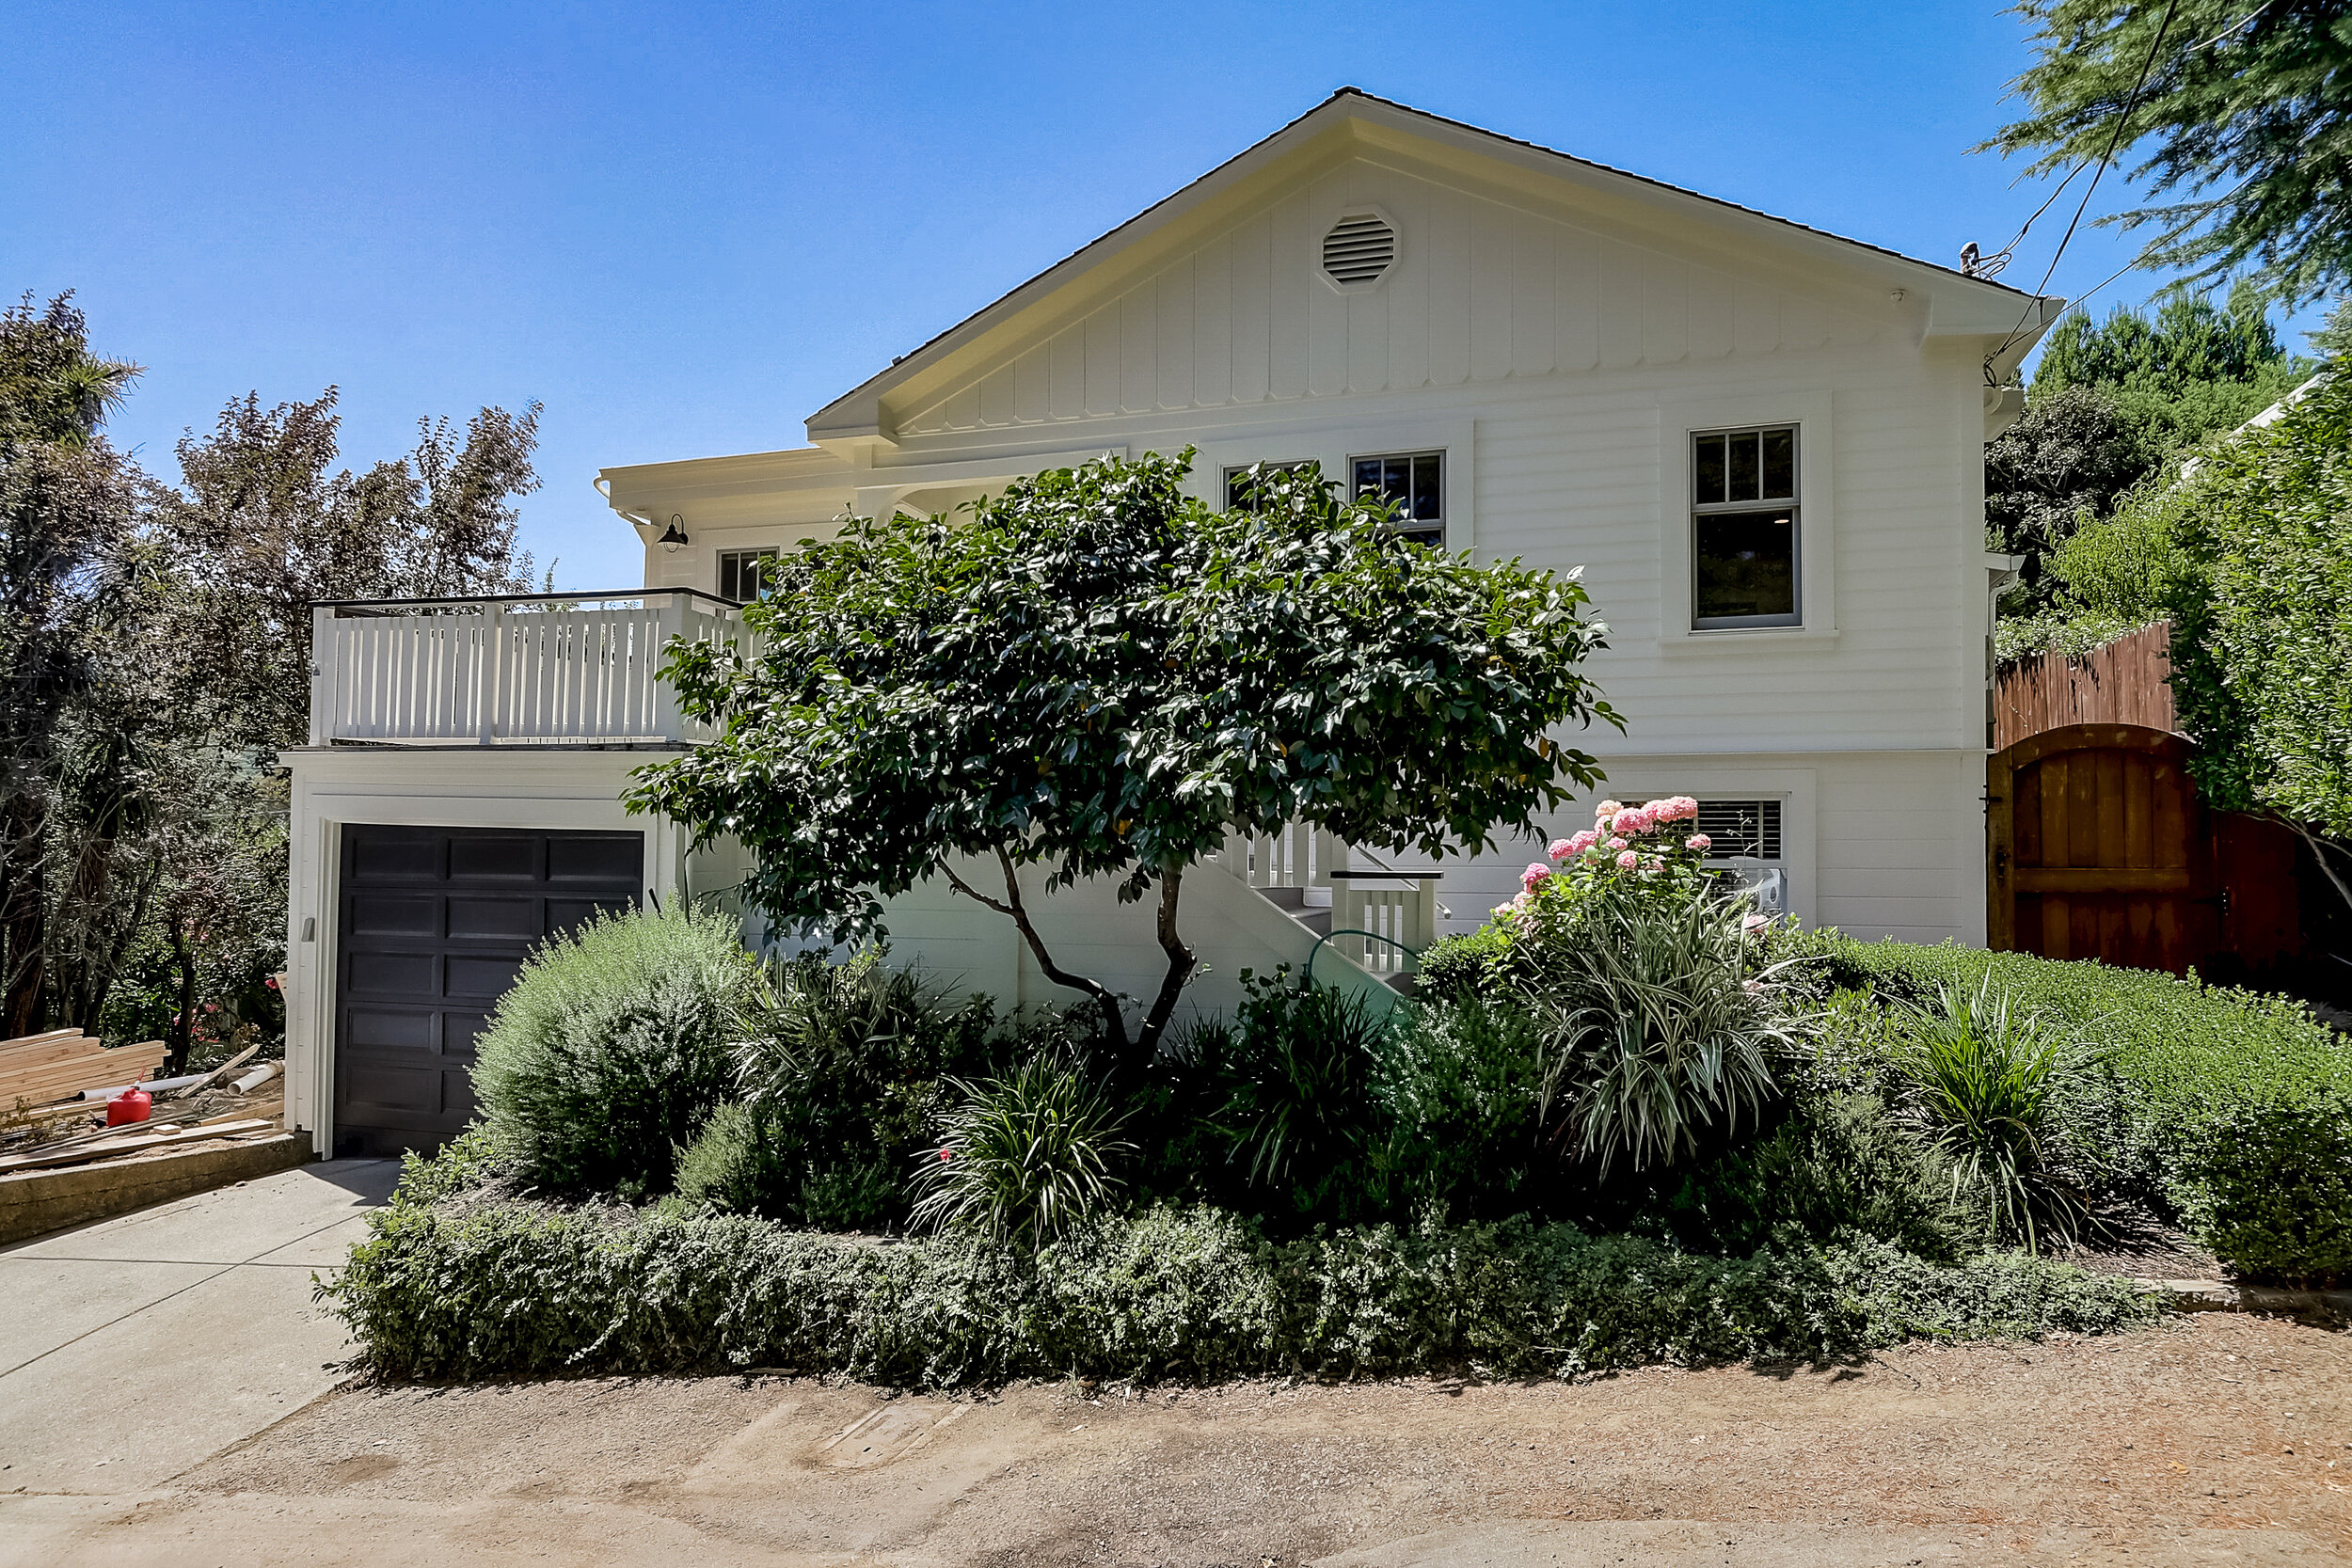 Own Marin Barr Haney Whitney Potter For Sale 9 Terrace Avenue, Kentfield California Marin County #1 Real Esate Agents-37.jpg